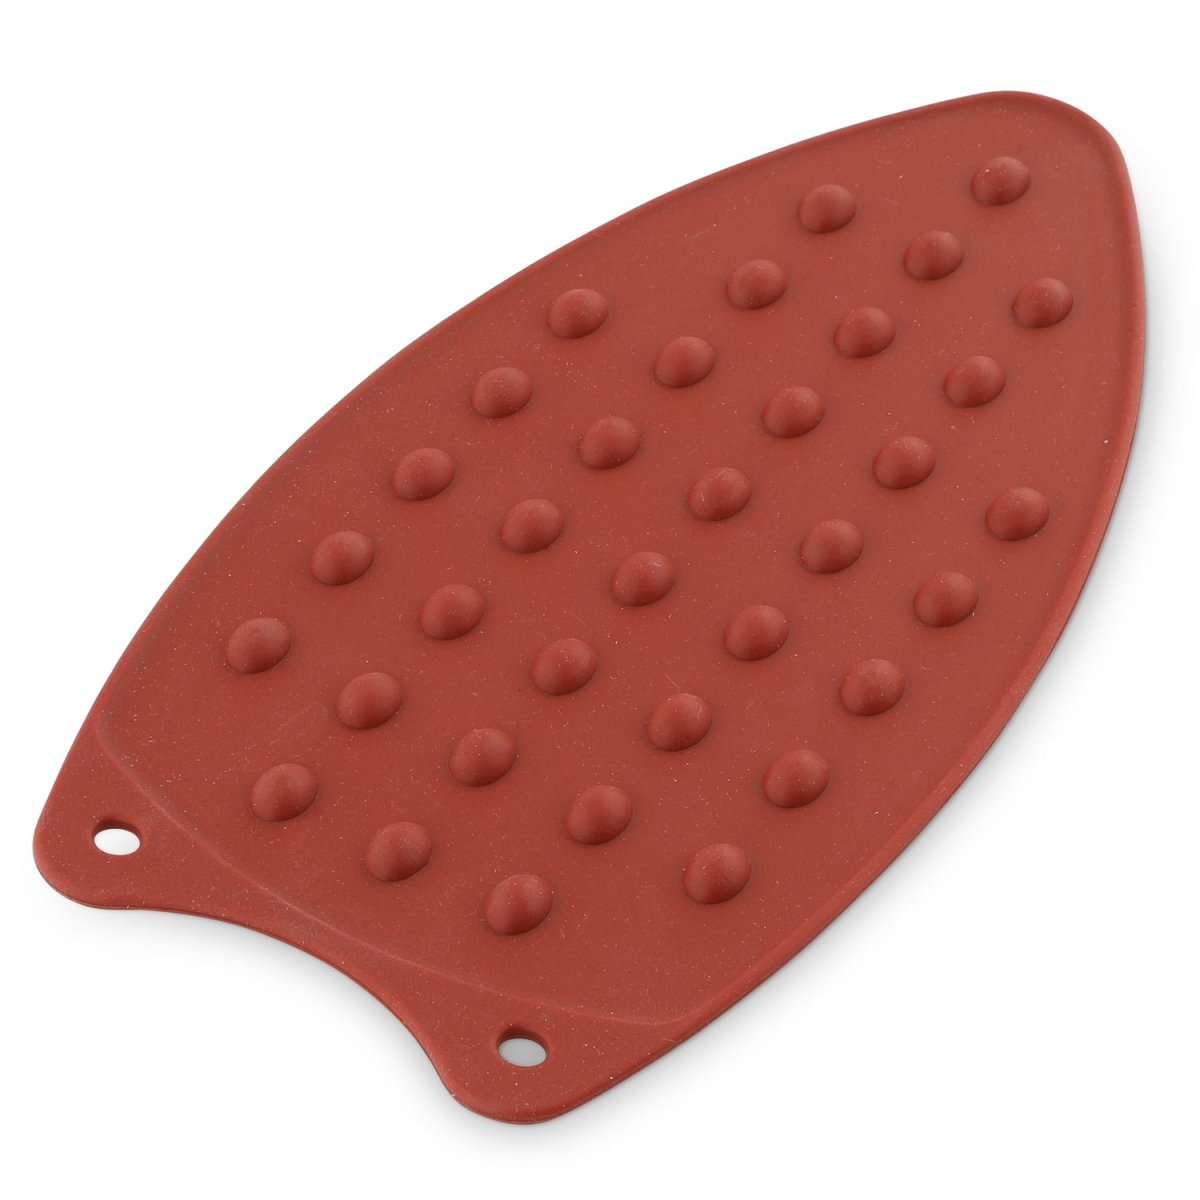 Iron Rest - A Flexible Silicone Pad for Hot Irons